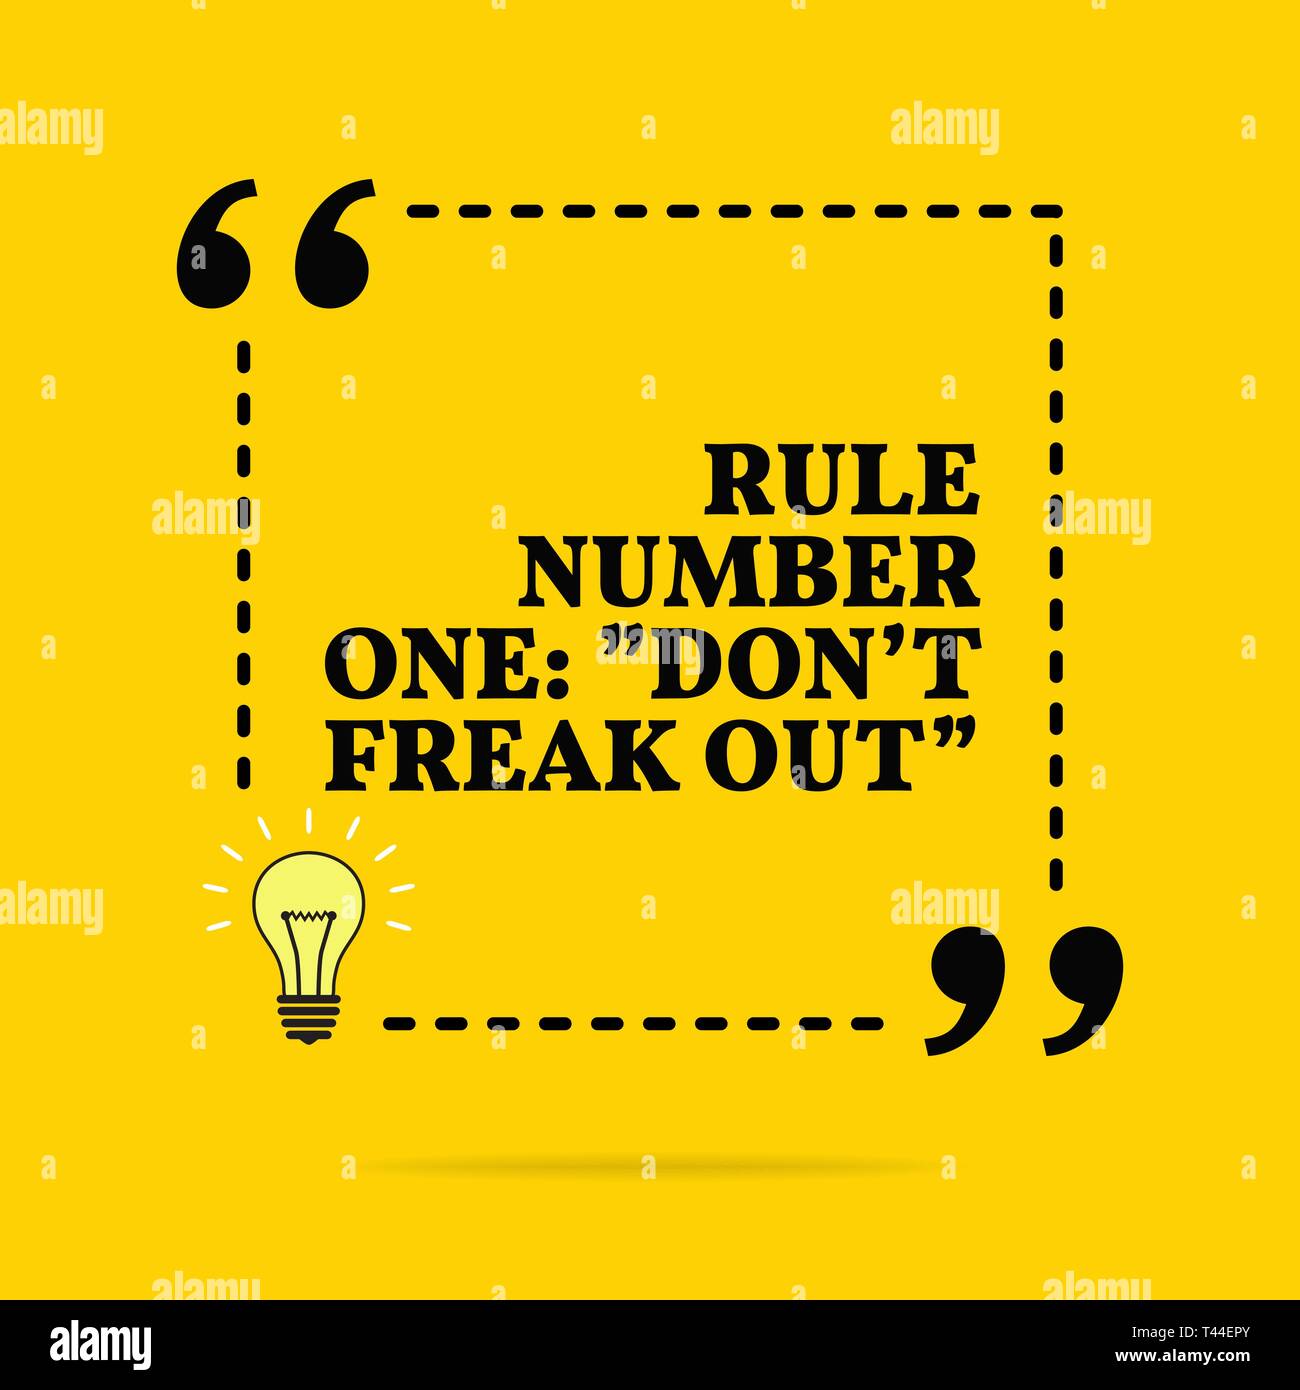 Inspirational motivational quote. Rule number one: 'Don't freak out'. Vector simple design. Black text over yellow background Stock Vector